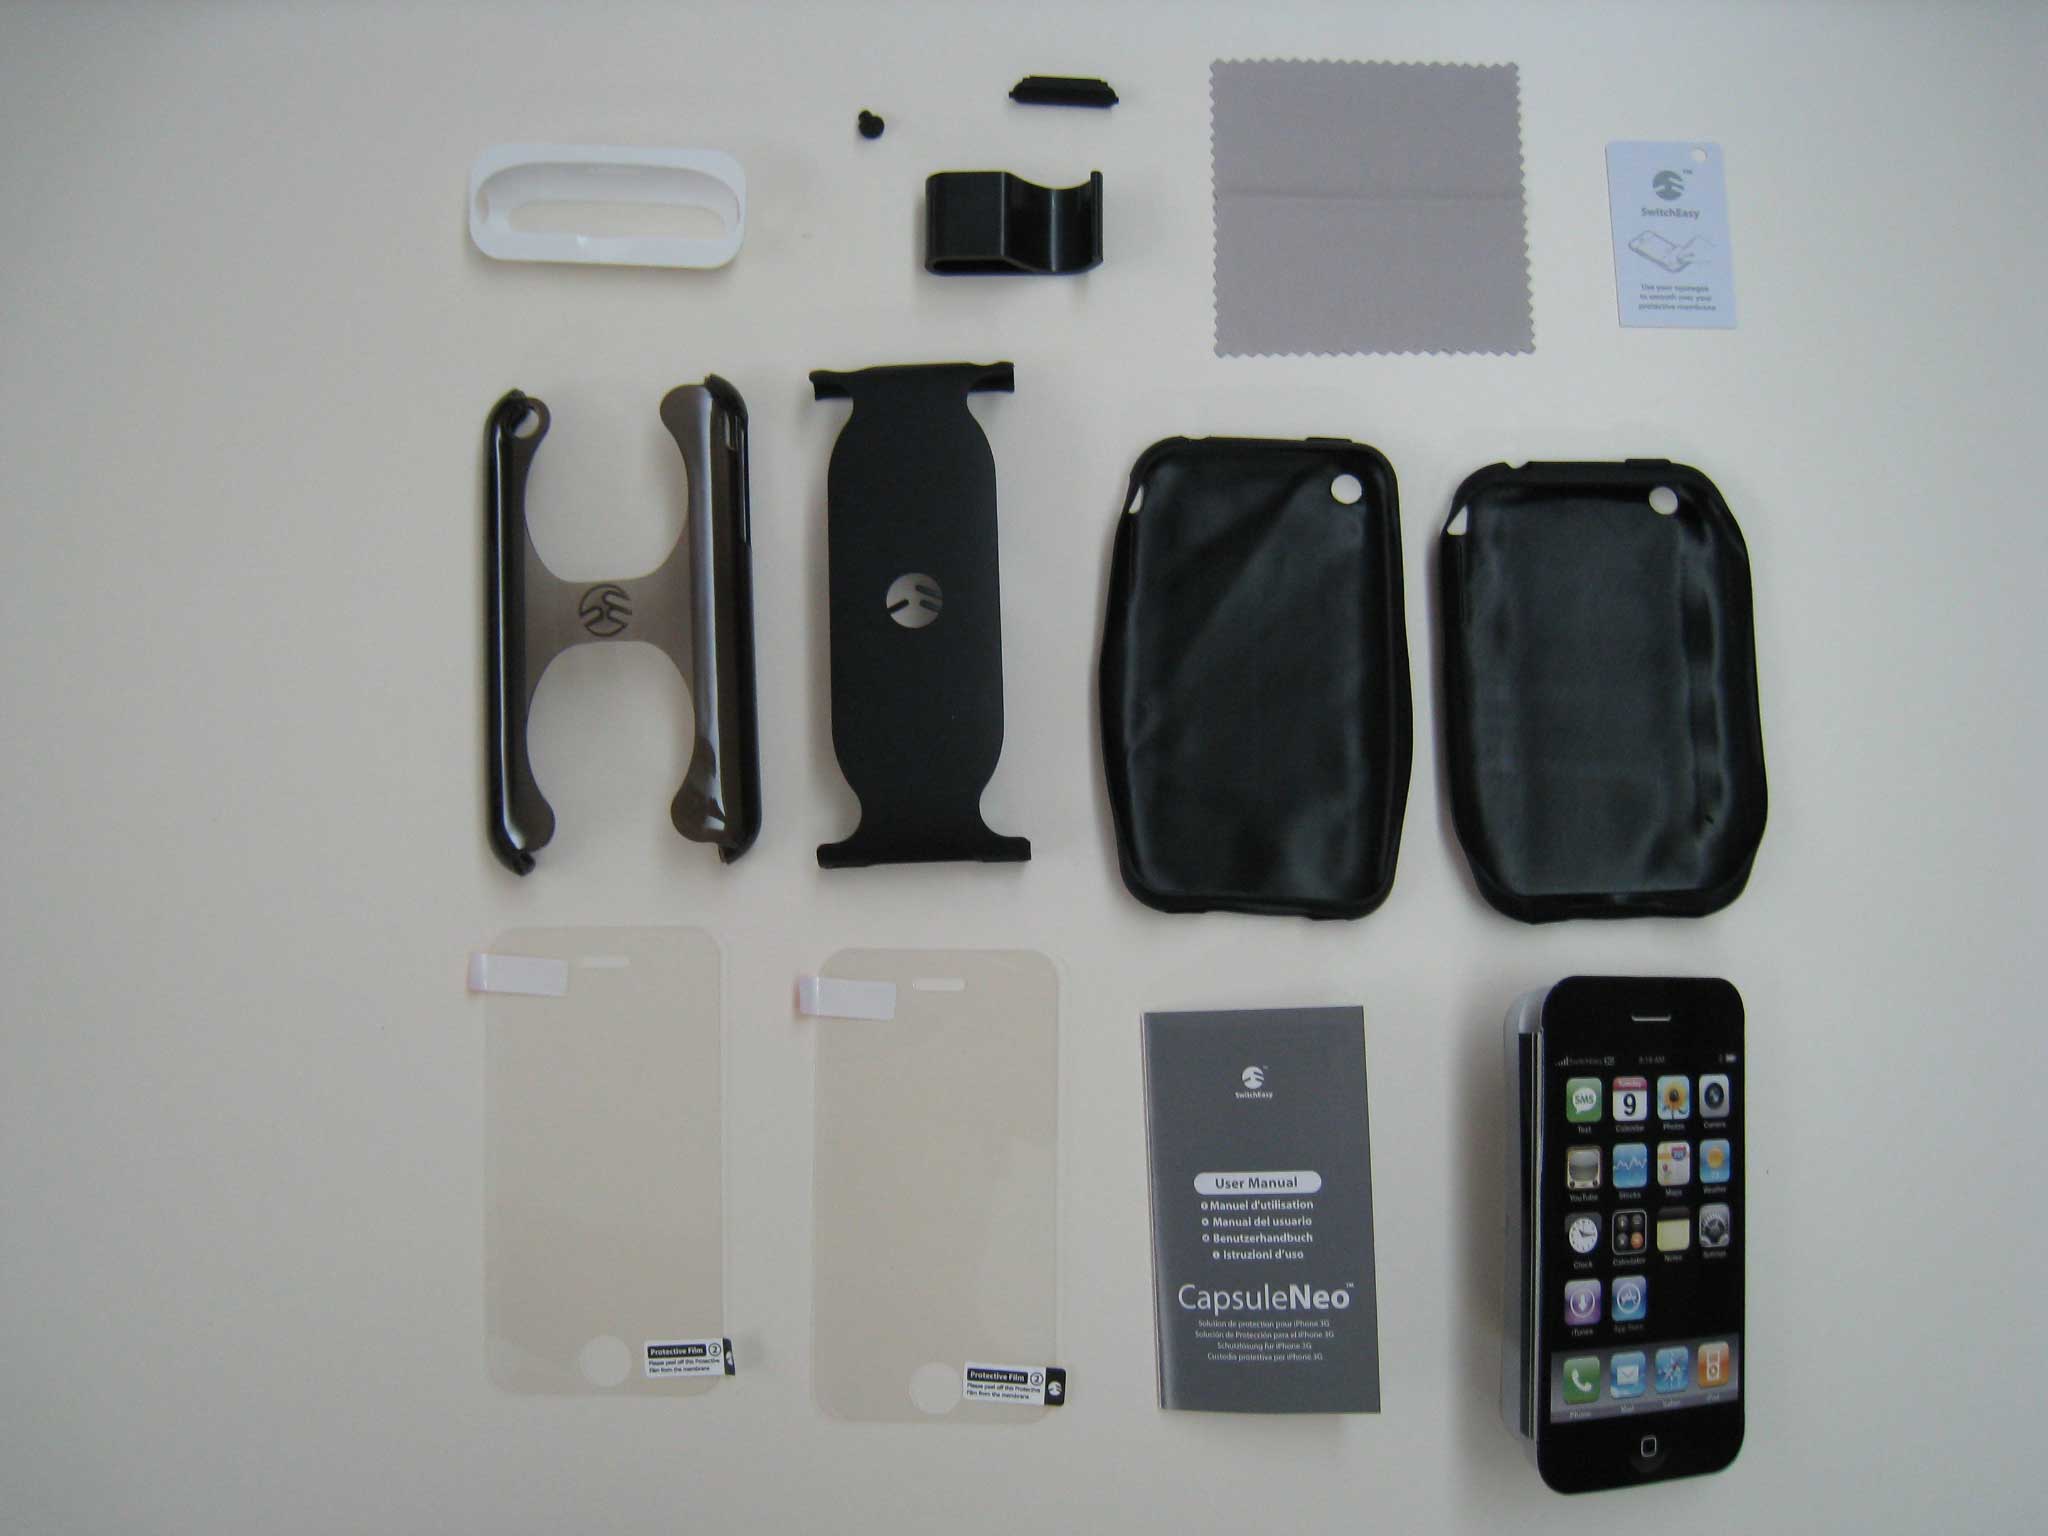 Viewing Image - contents.jpg